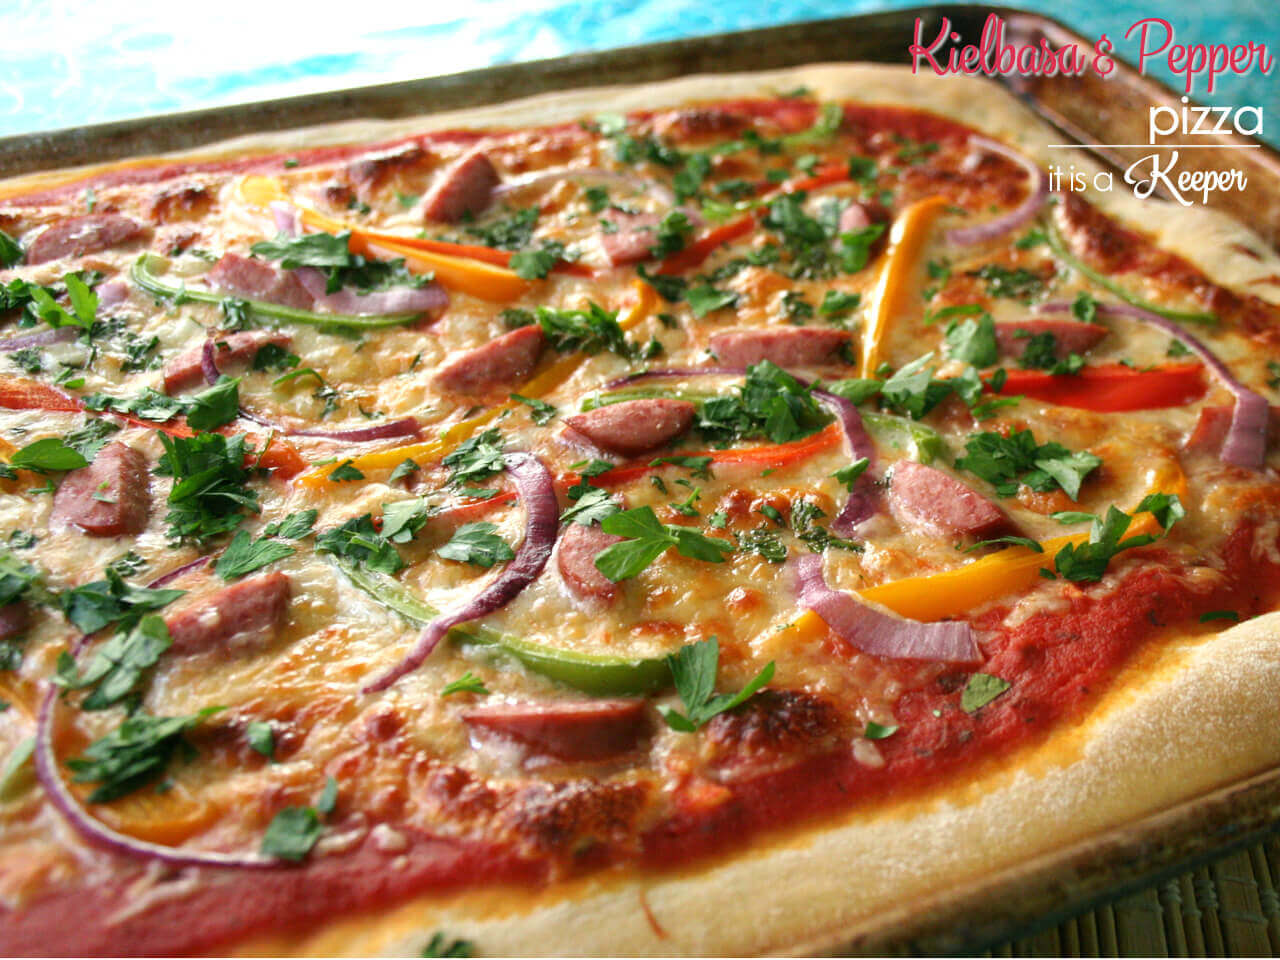 This Kielbasa and Pepper Pizza is a quick and easy recipe that is ready in under 30 minutes